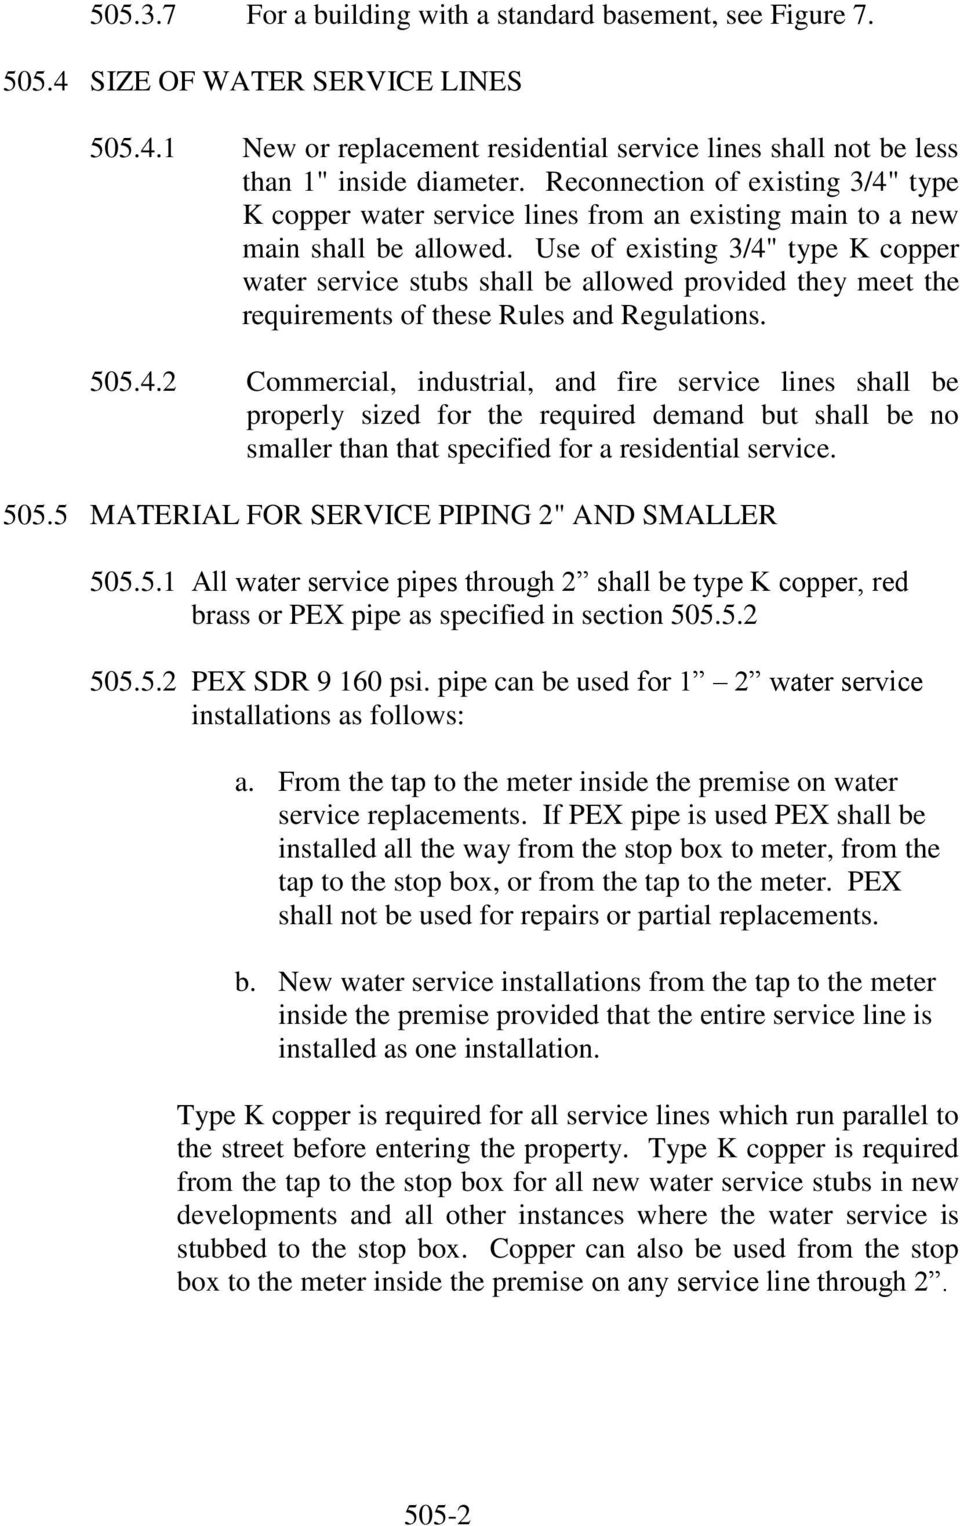 Use of existing 3/4" type K copper water service stubs shall be allowed provided they meet the requirements of these Rules and Regulations. 505.4.2 Commercial, industrial, and fire service lines shall be properly sized for the required demand but shall be no smaller than that specified for a residential service.